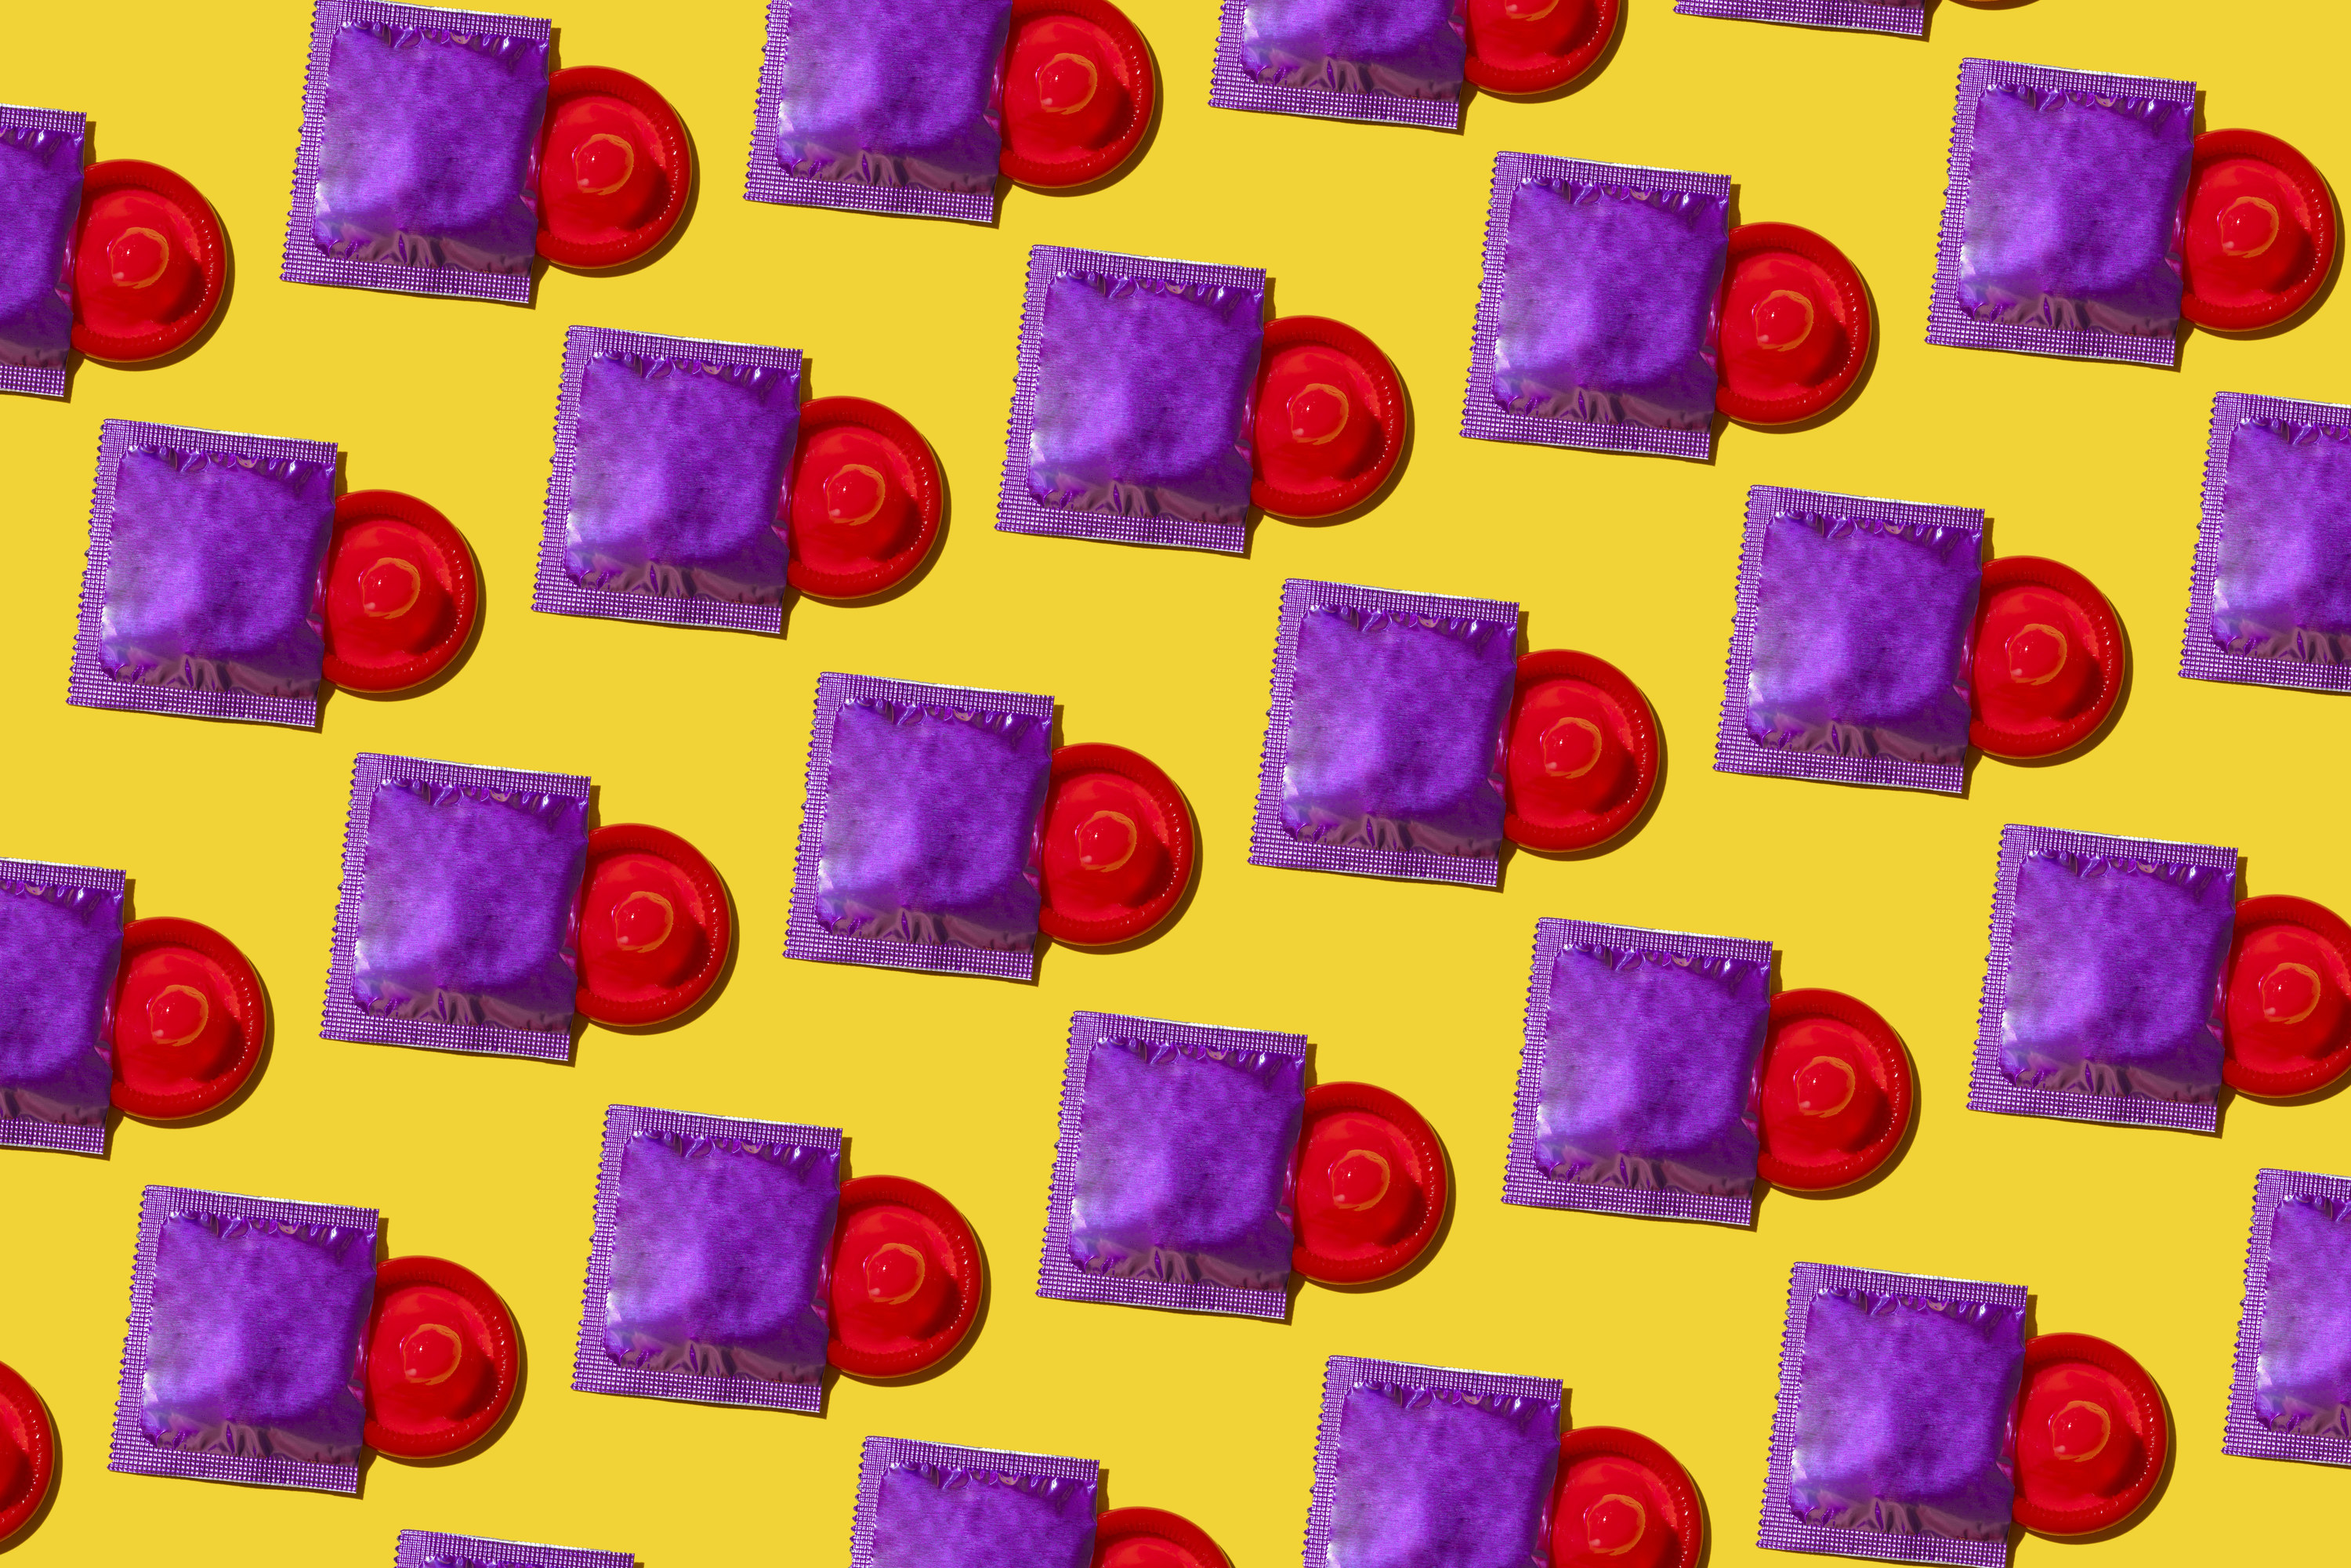 red condoms in purple wrappers on a yellow background